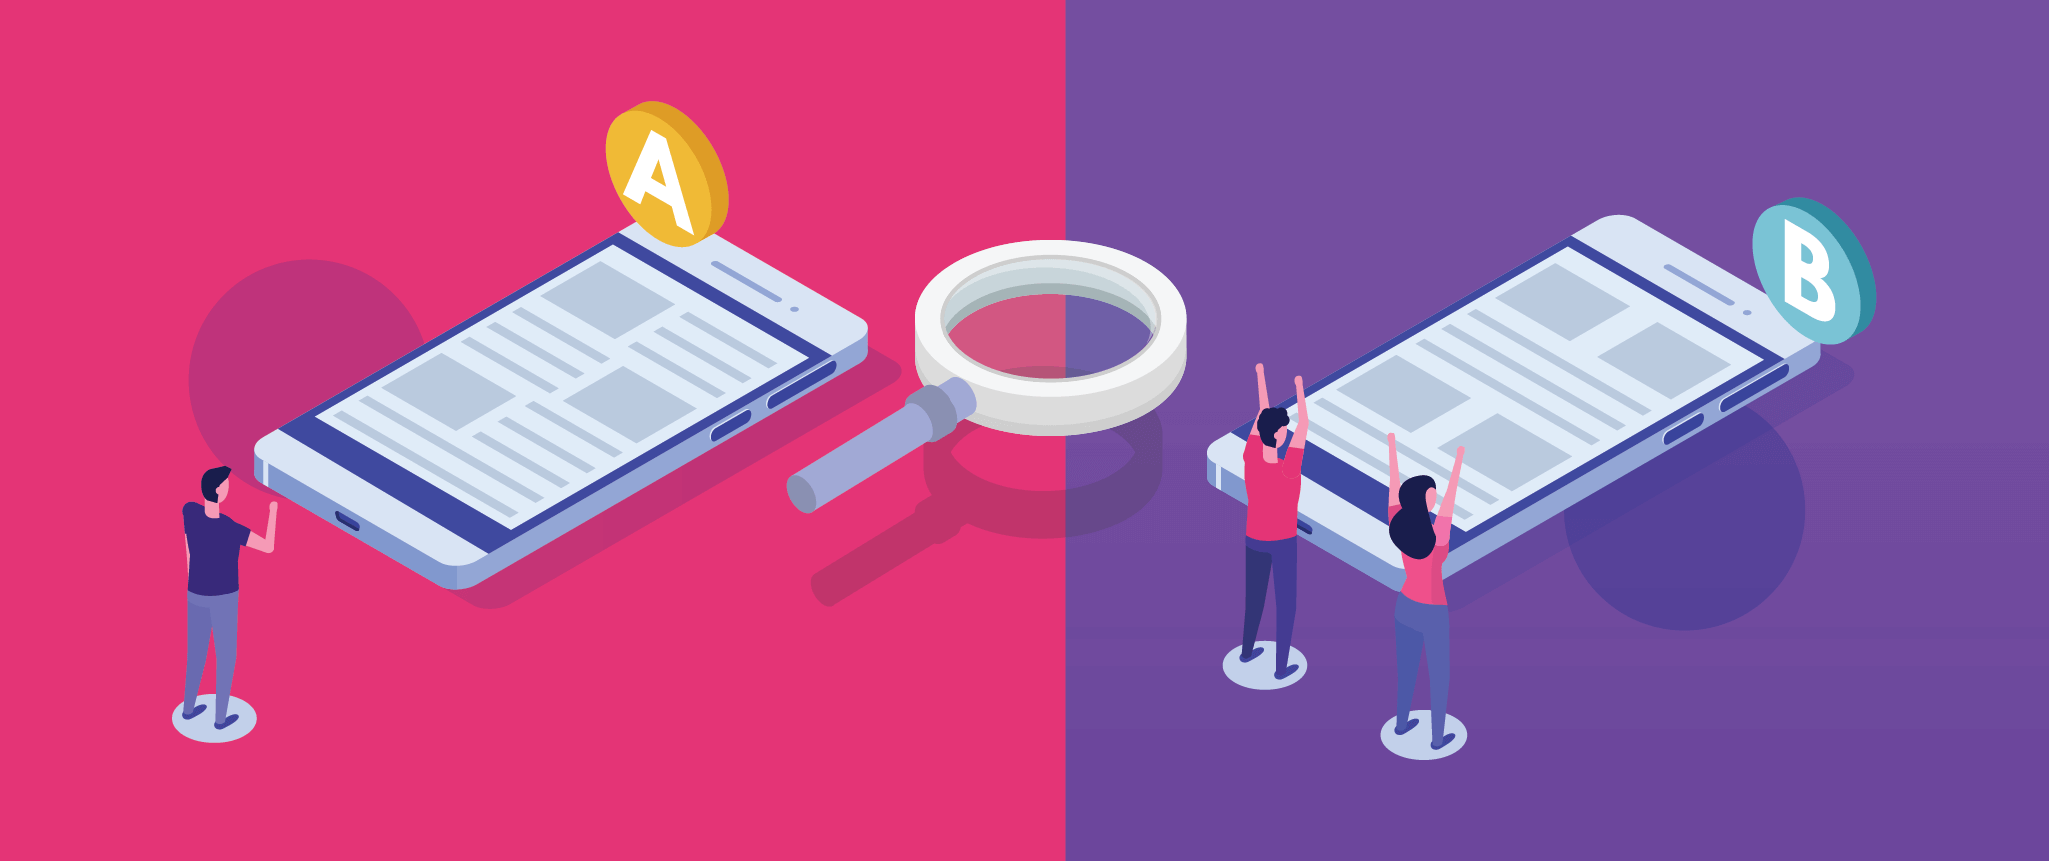 Screen A/B Testing for Mobile Applications: Using Data to Design Better User Experiences - CleverTap